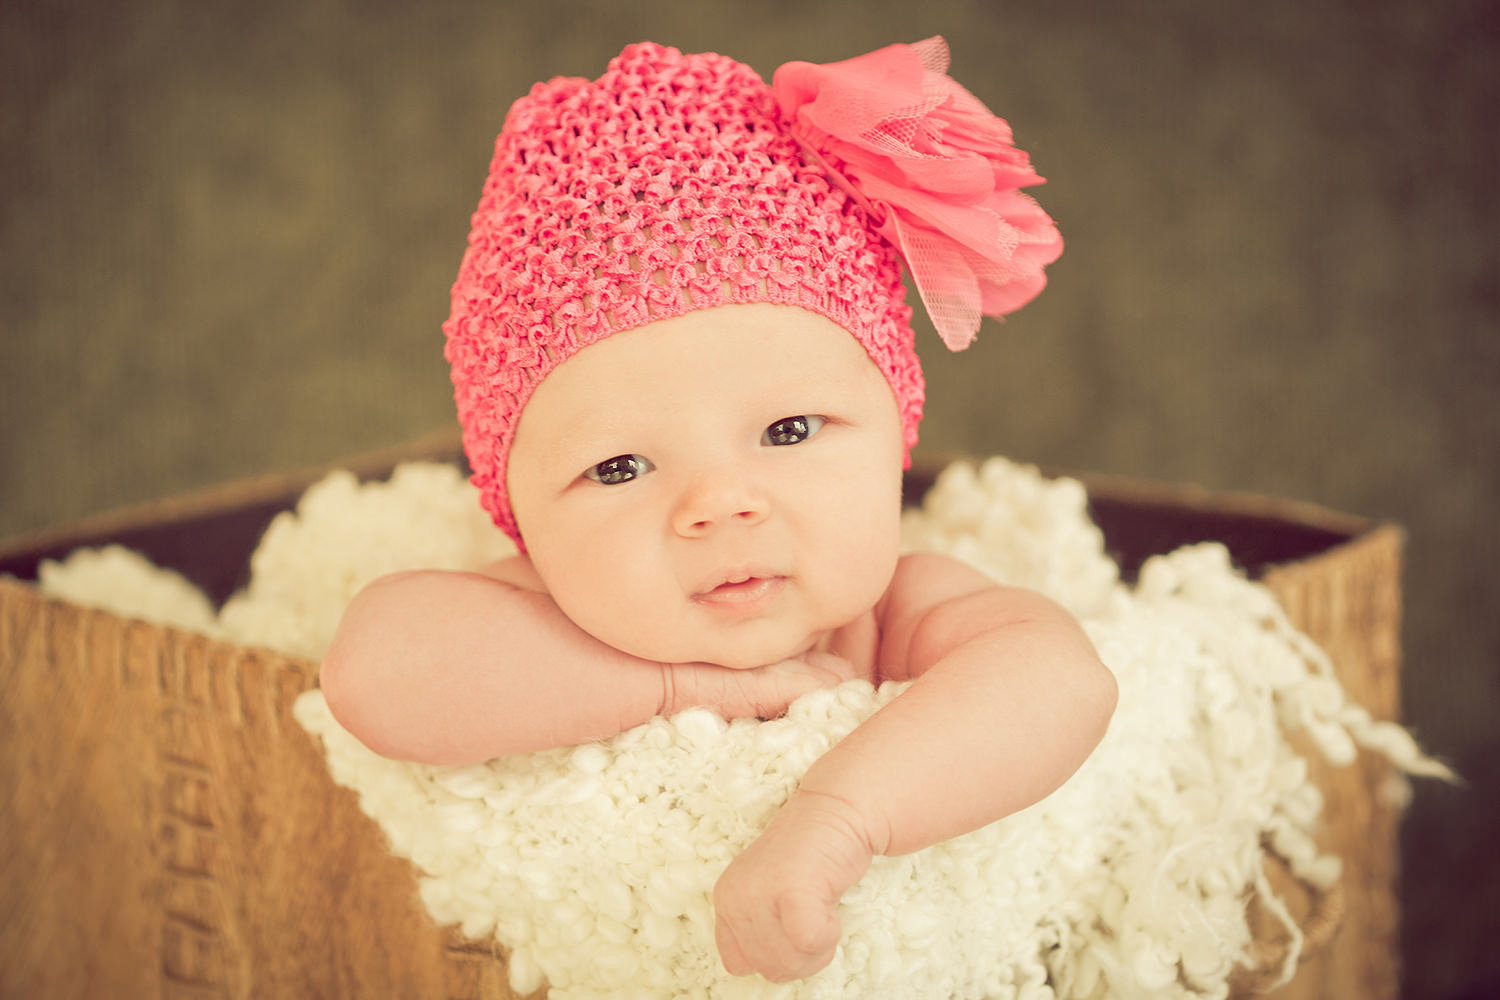 san diego newborn photography | newborn in cute wood box with adorable pink hat